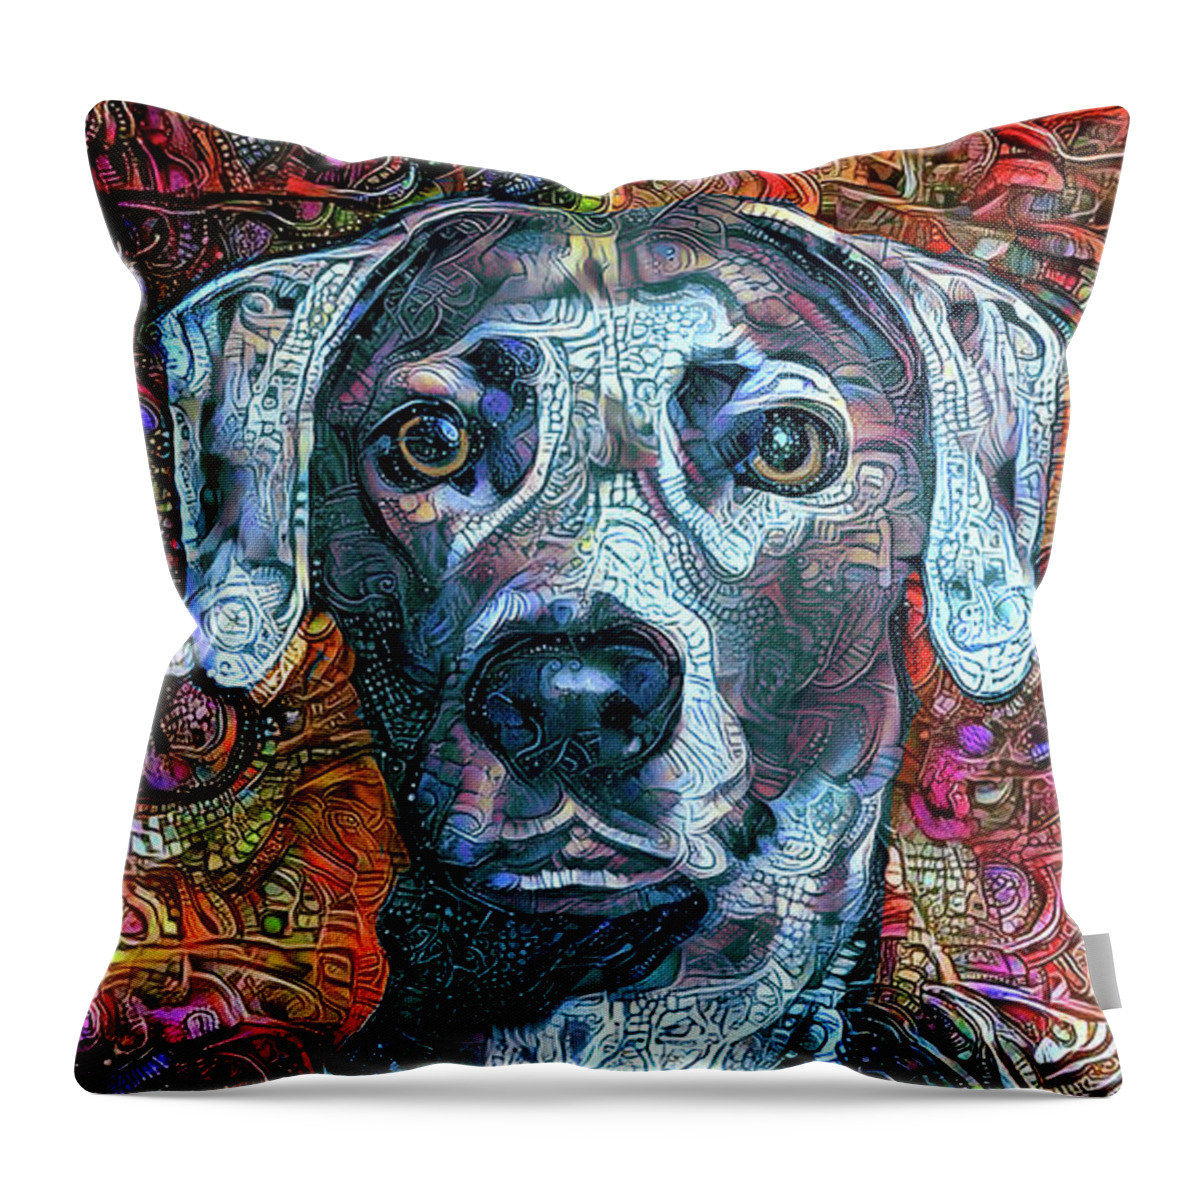 Lacy Dog Throw Pillow featuring the digital art Cash the Blue Lacy Dog by Peggy Collins